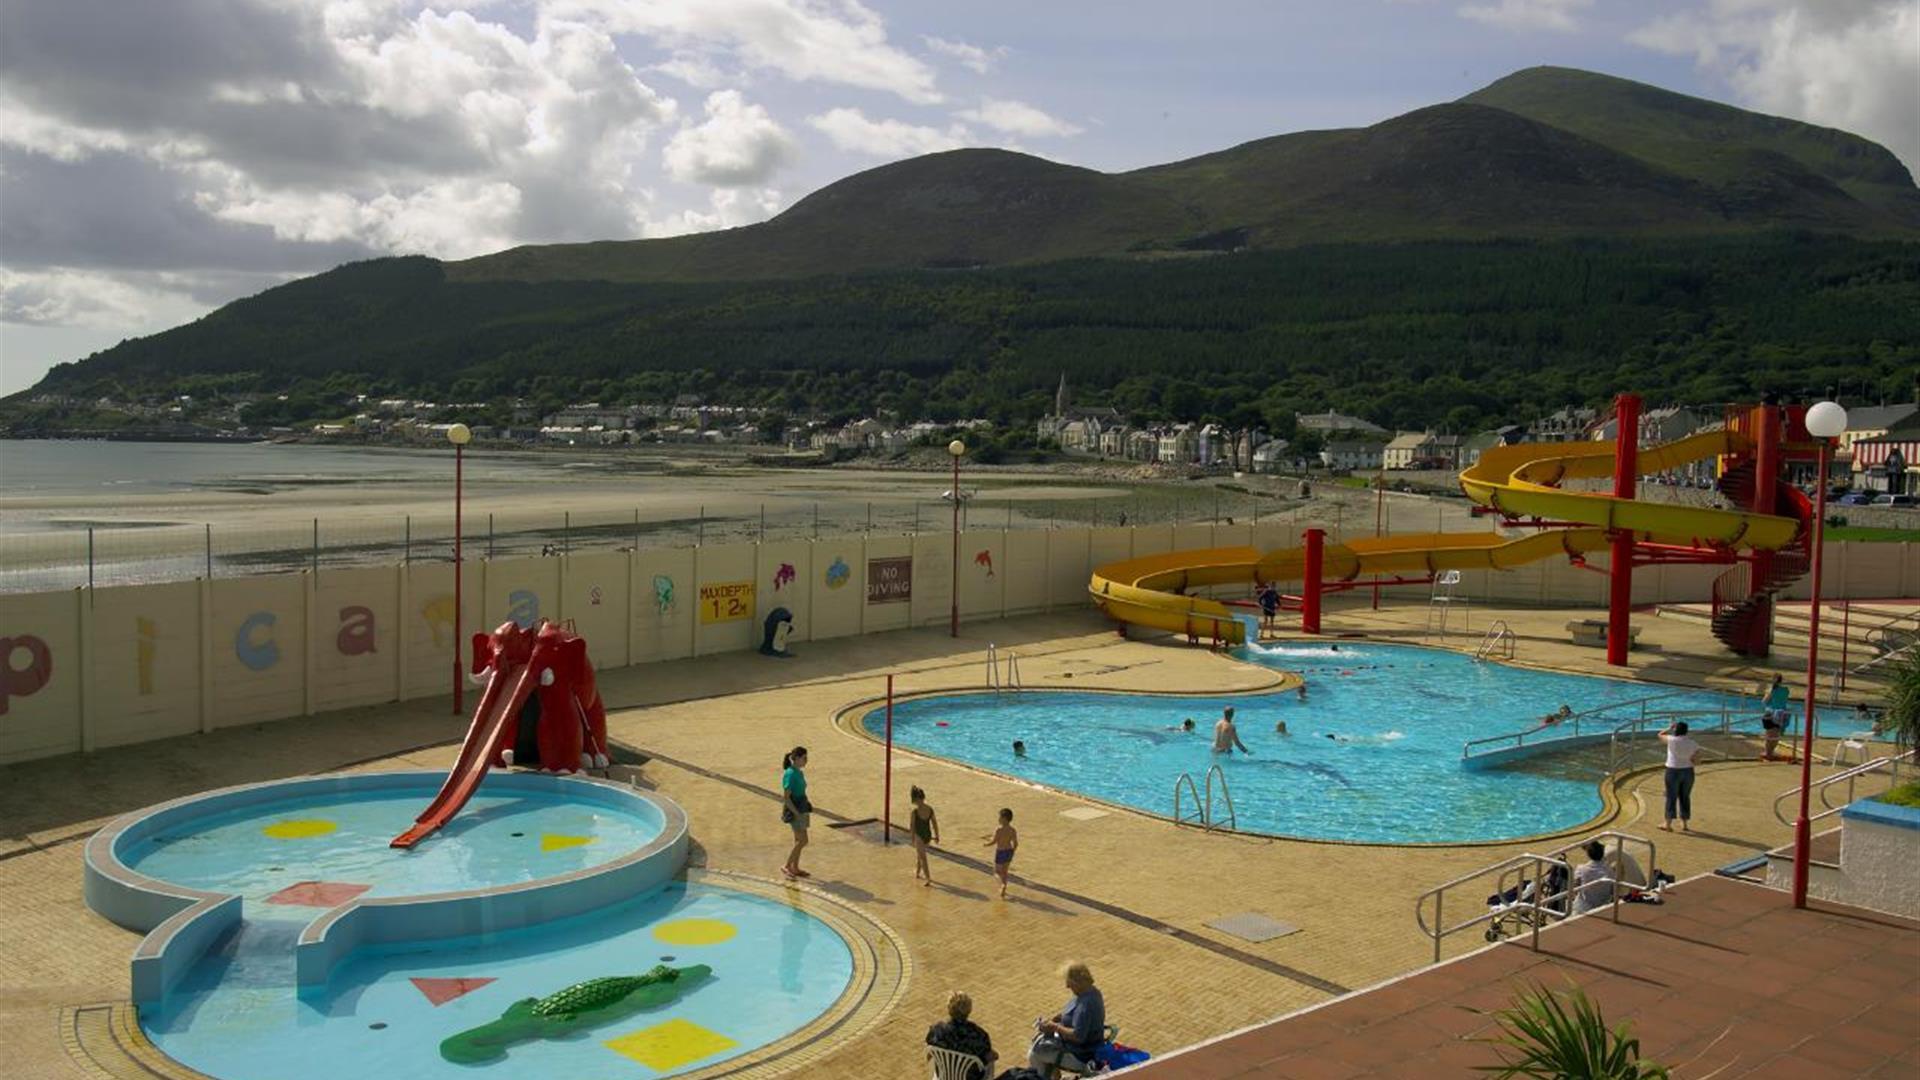 Tropicana outdoor heated fun pool with the Mourne Mountains in the background